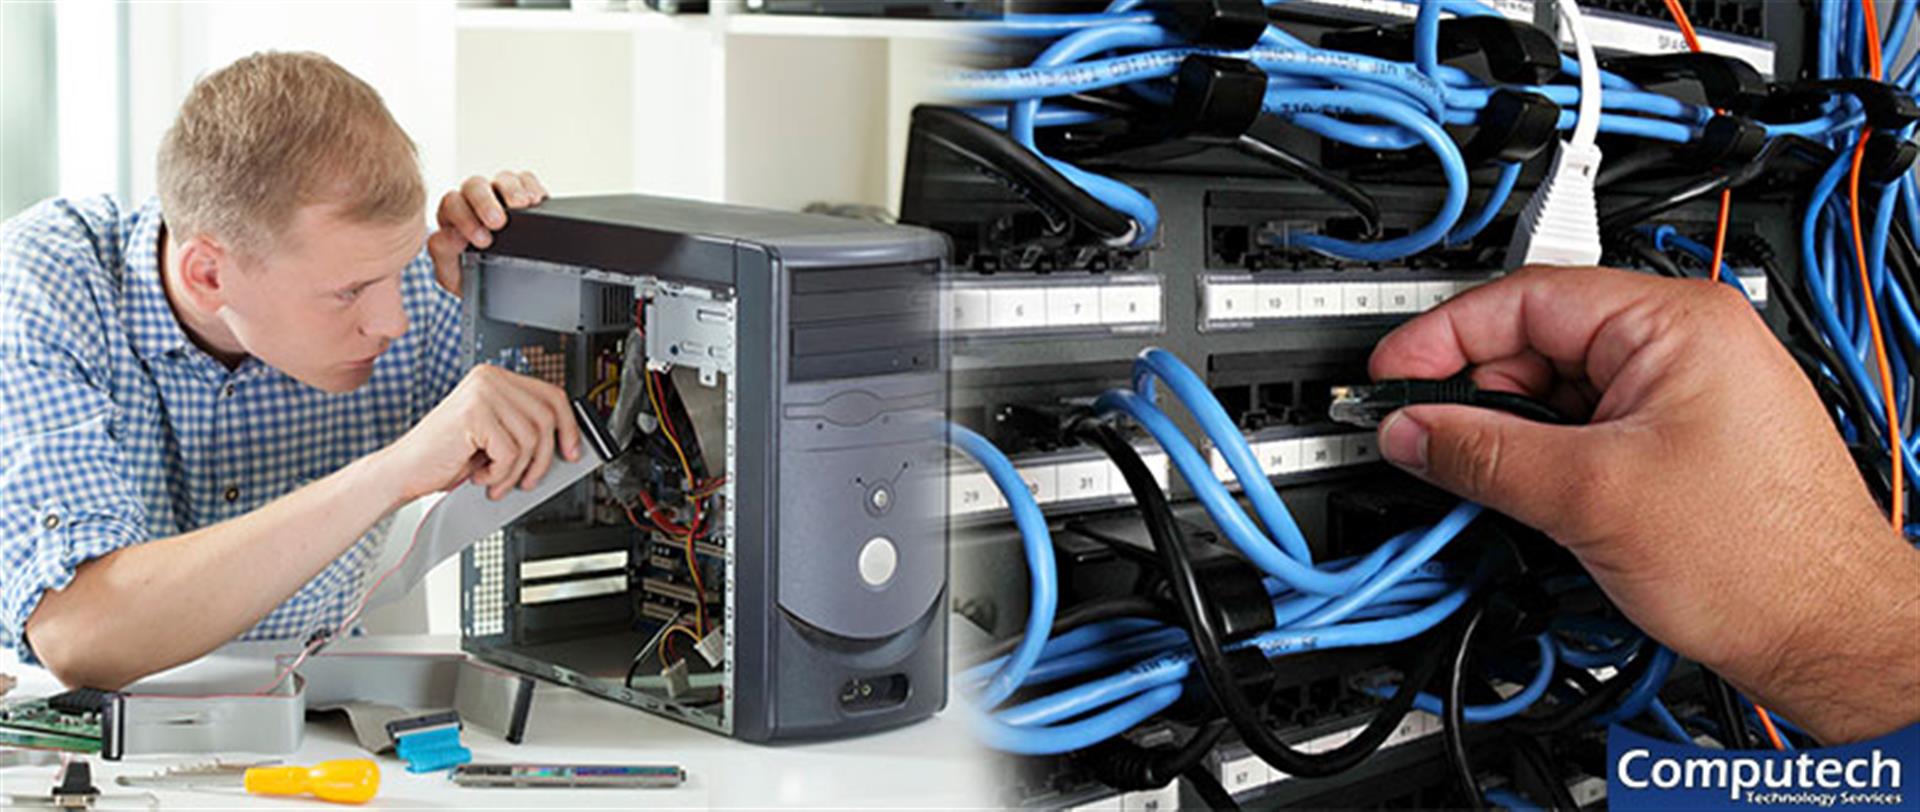 Goodlettsville Tennessee On Site Computer PC & Printer Repair, Networking, Voice & Data Cabling Solutions